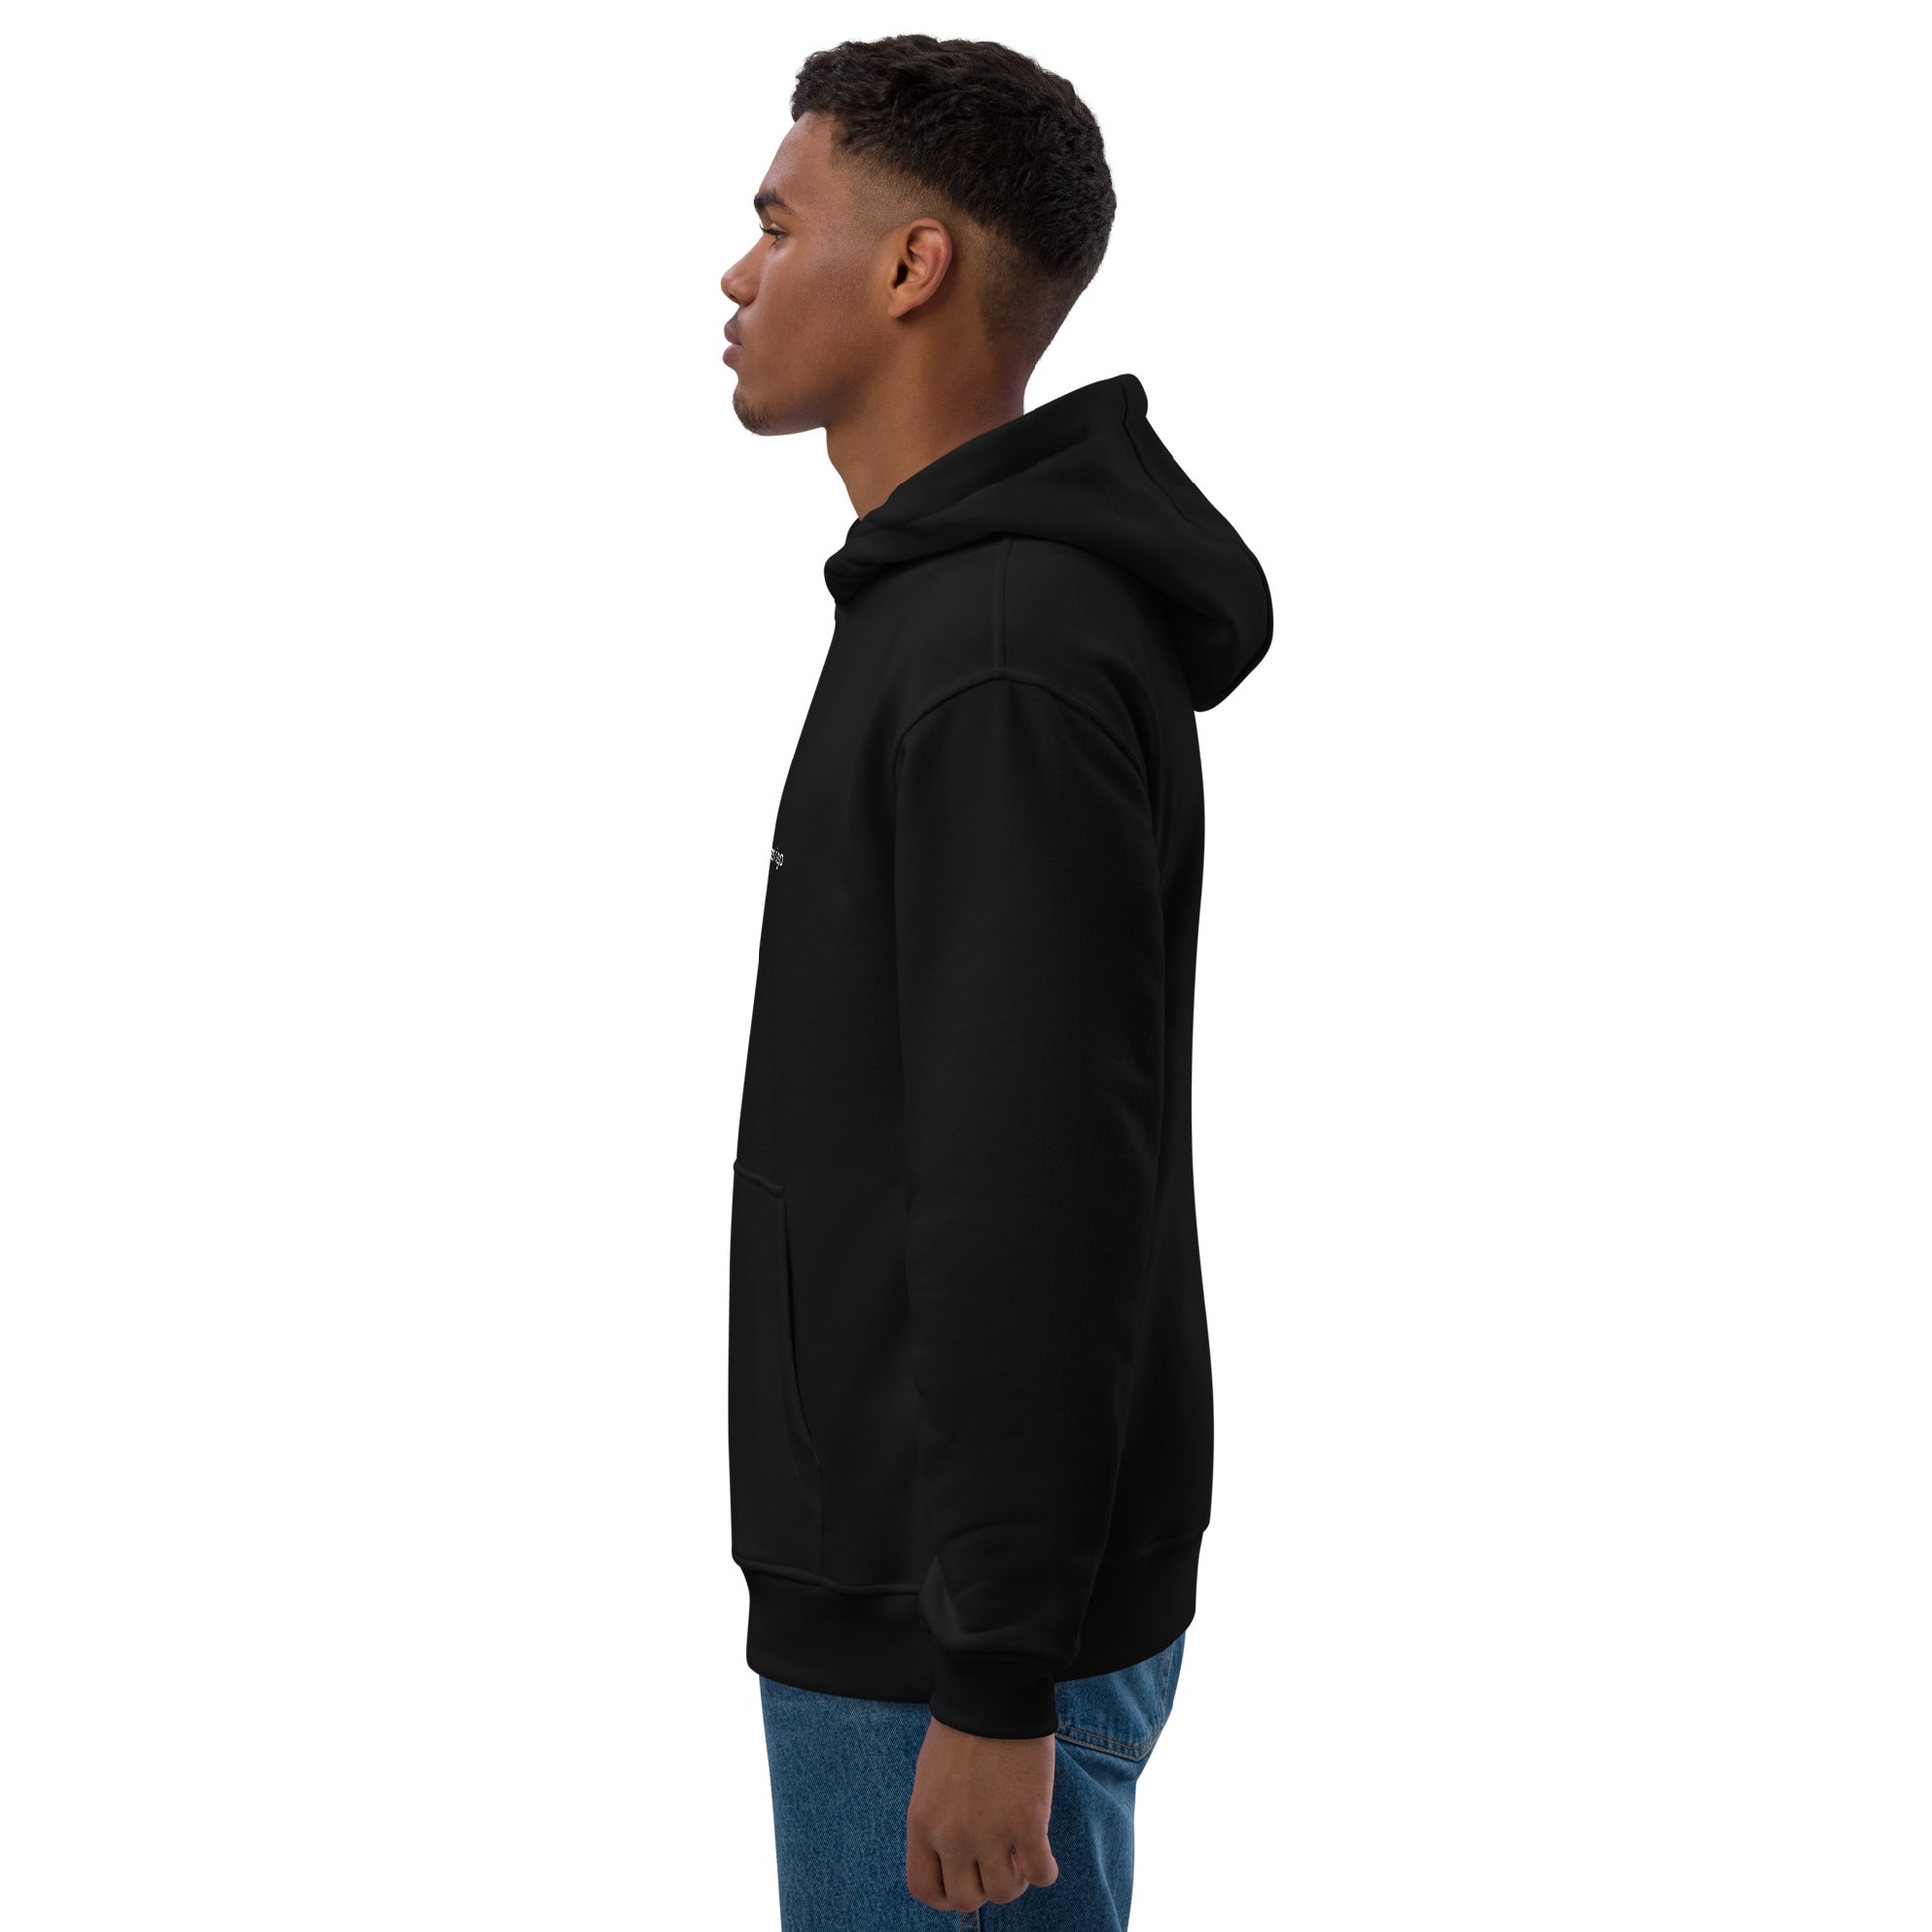 side view of a black man wearing a black hoodie with the Coliving Residences Riga logo